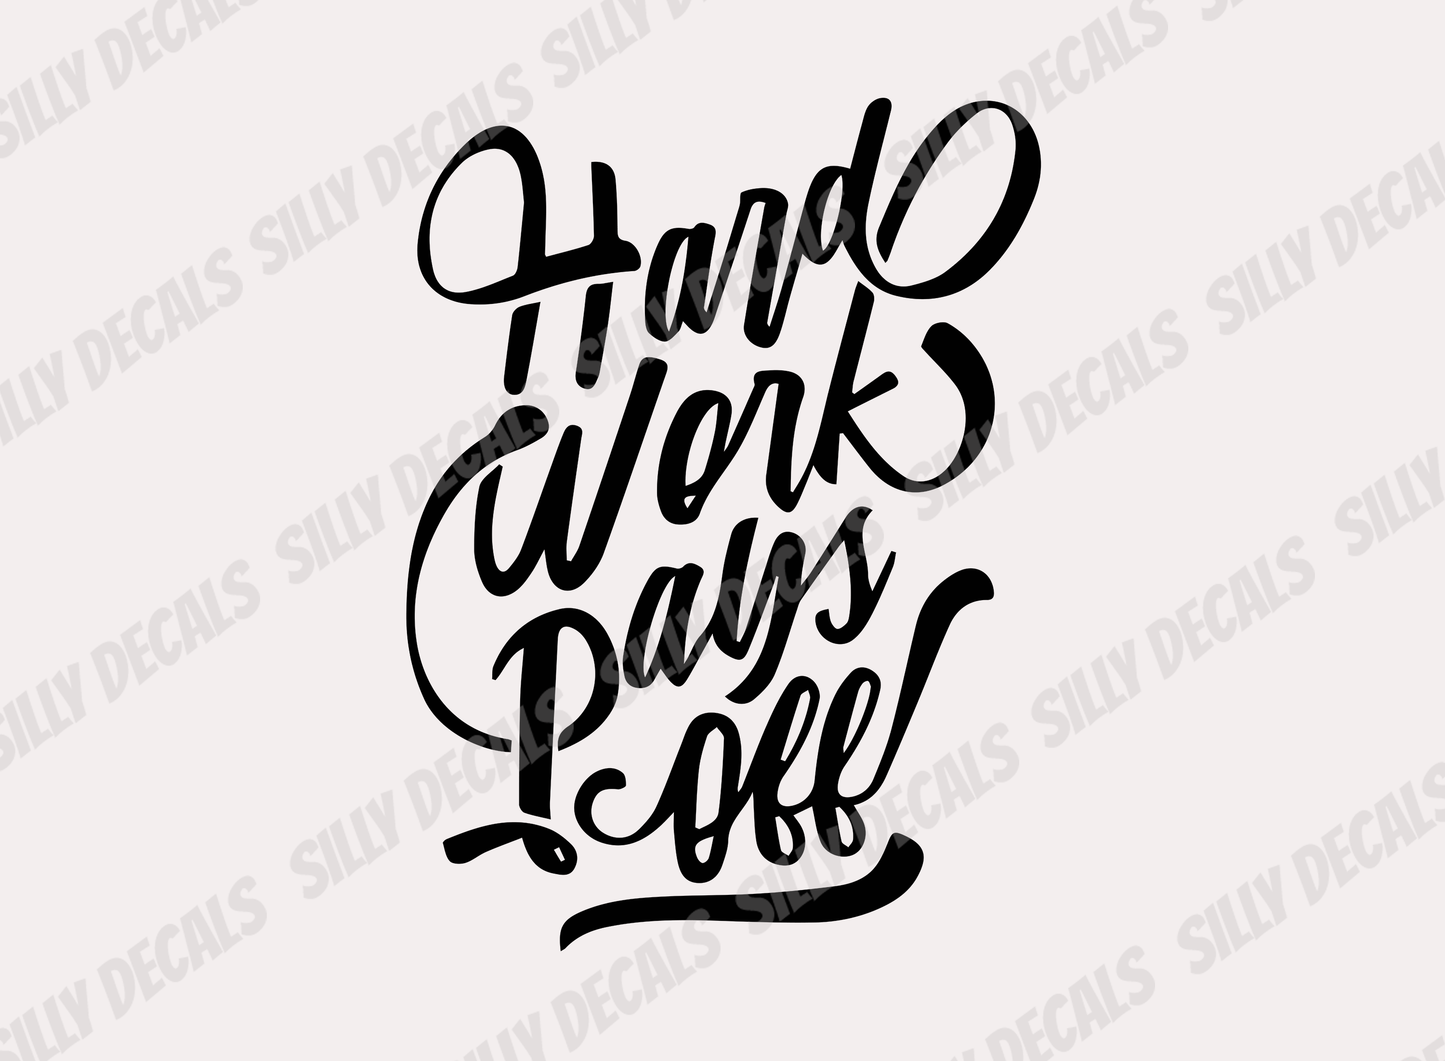 Hard Work Pays Off; Motivational Vinyl Decals Suitable For Cars, Windows, Walls, and More!